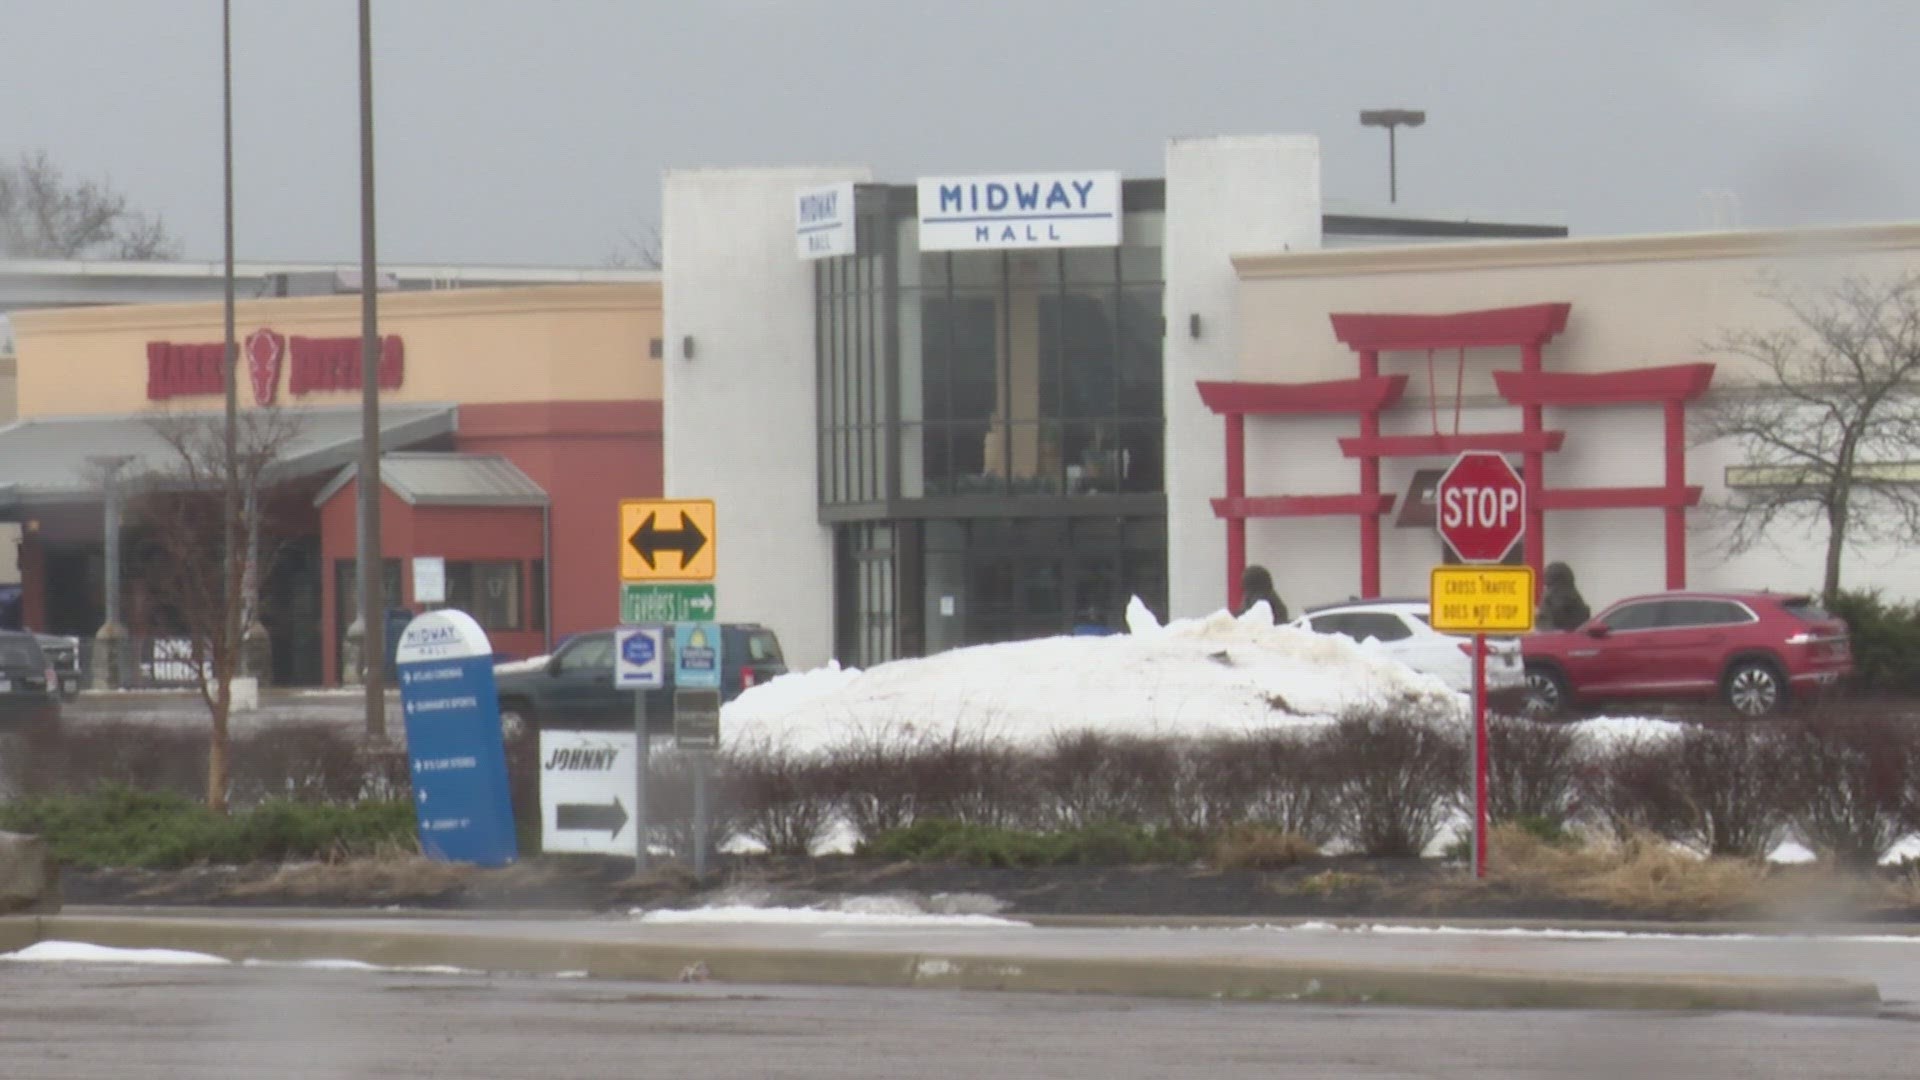 The Lorain County Port Authority says it is down to the final two proposals for the future of the Midway Mall space.